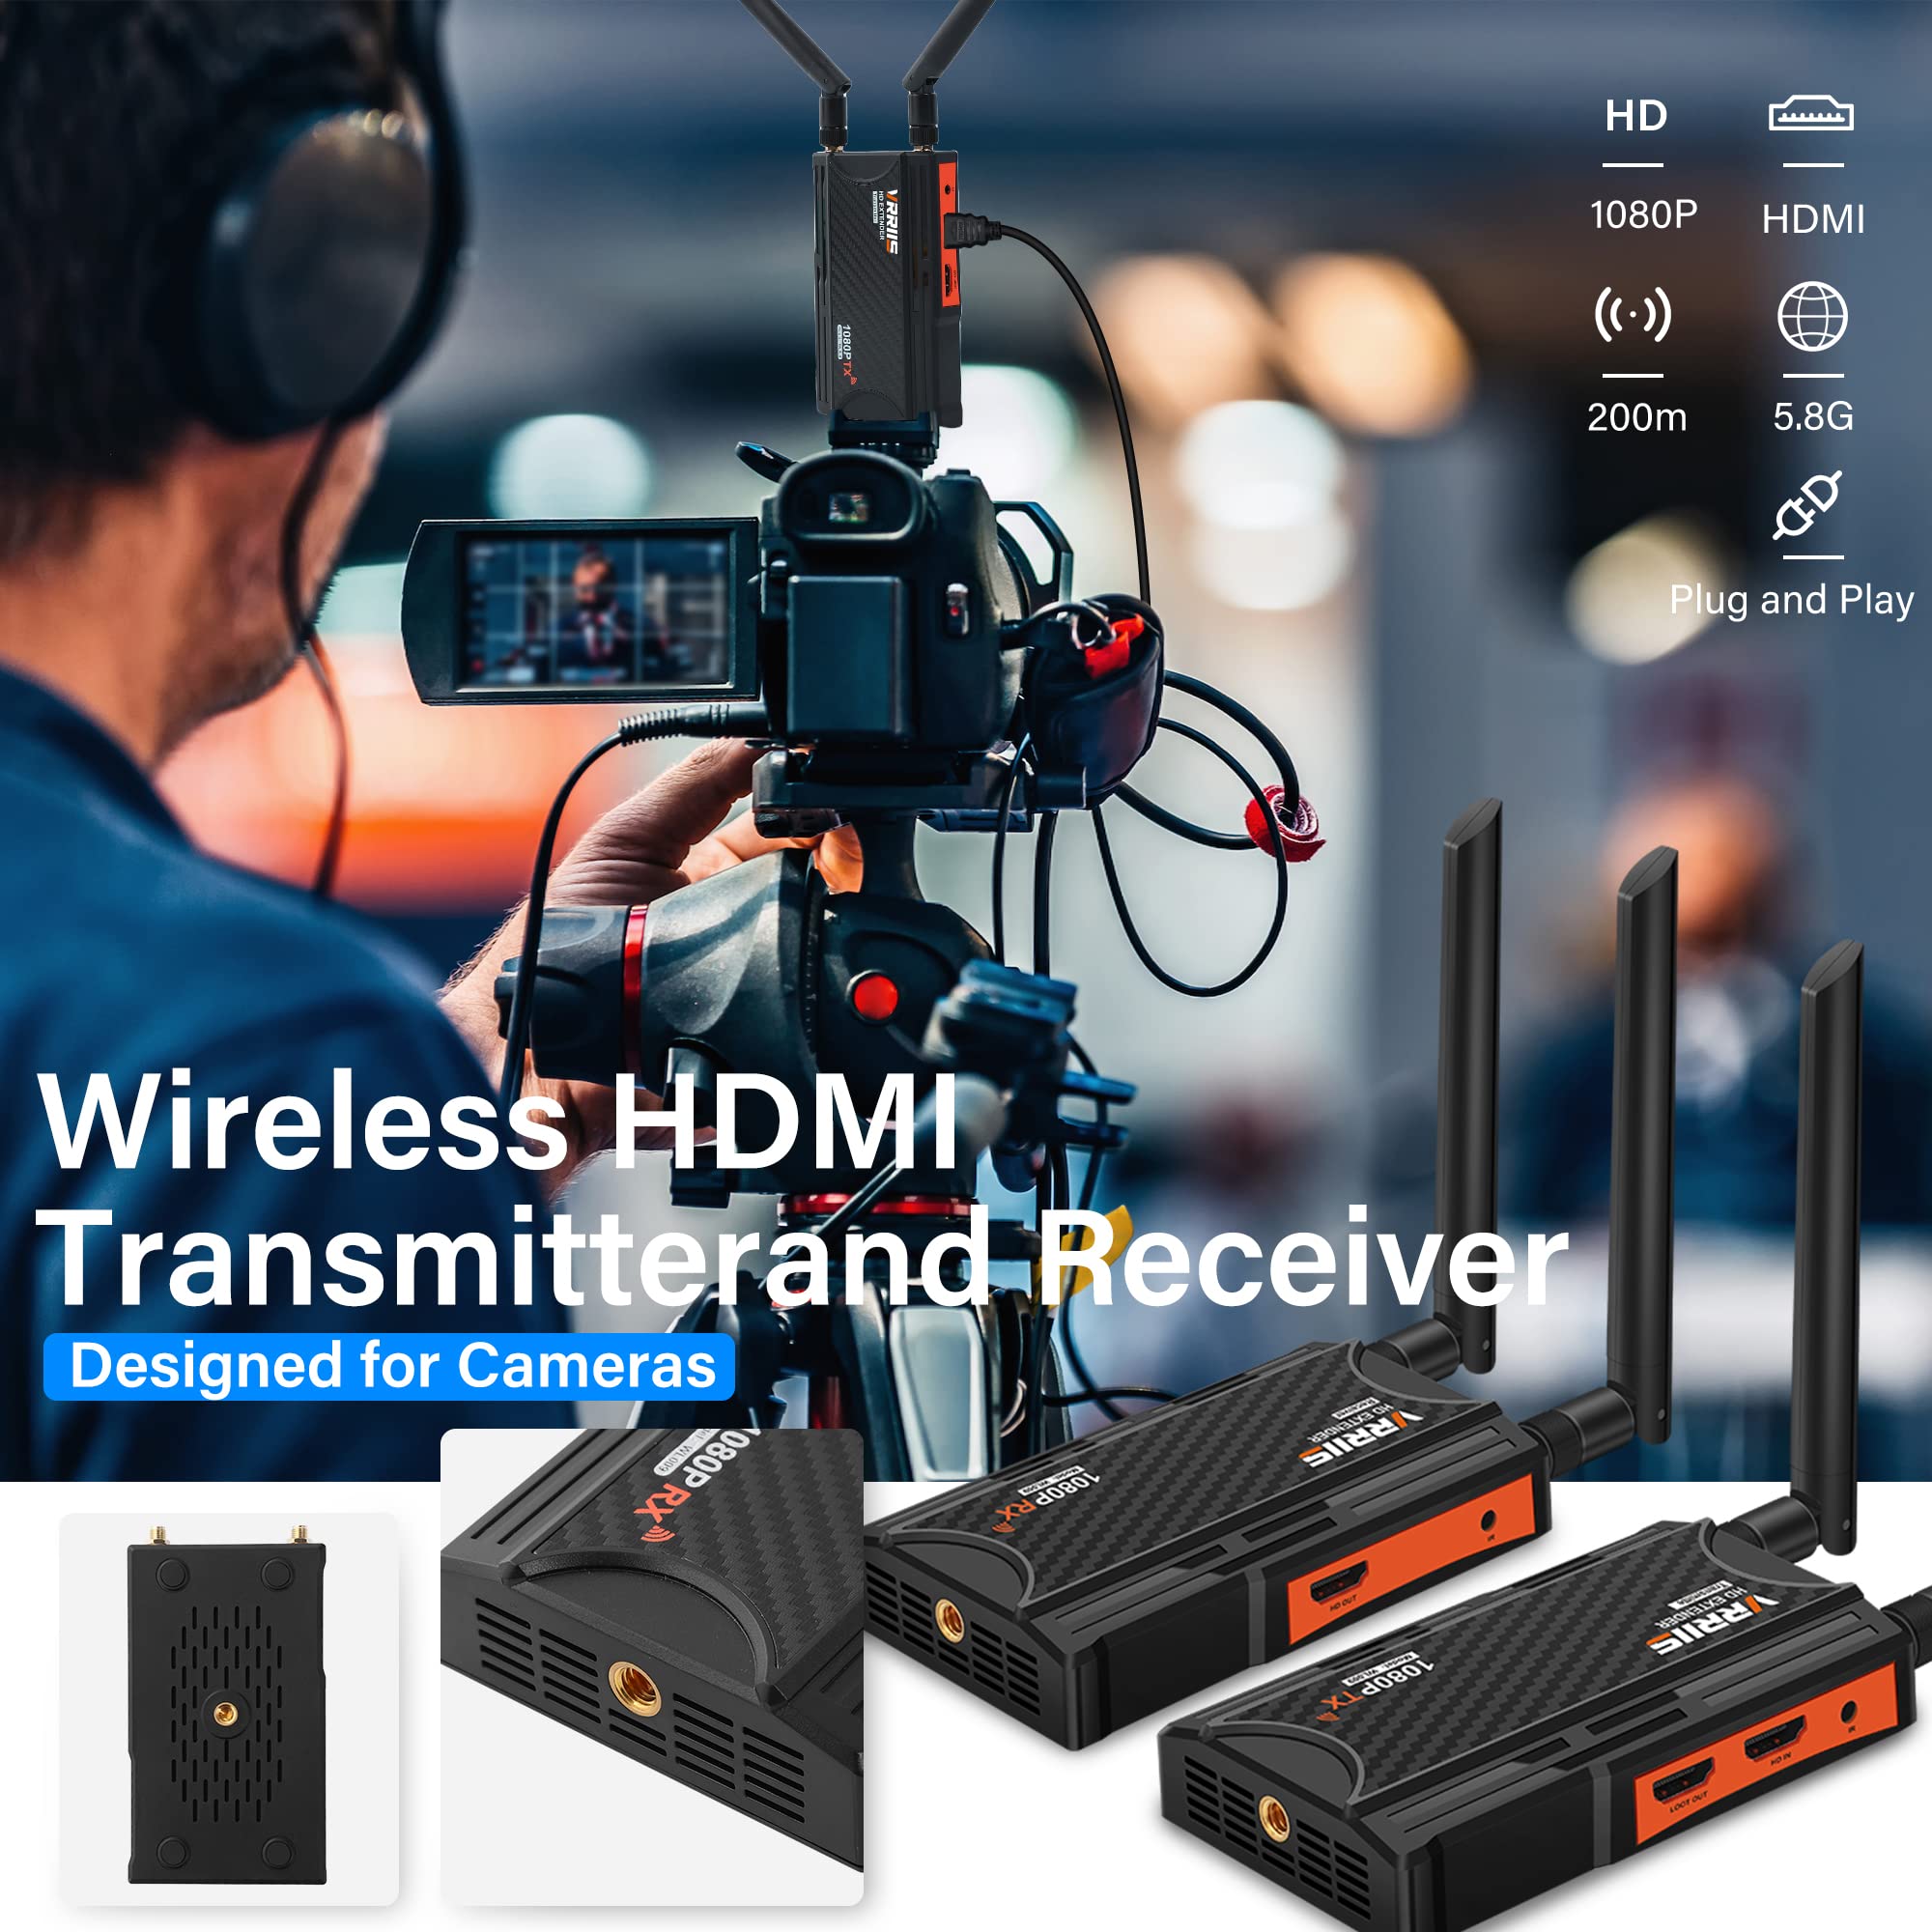 Wireless HDMI Transmitter and Receiver, 1 Transmitter and 3 Receivers (1TX 3RX)